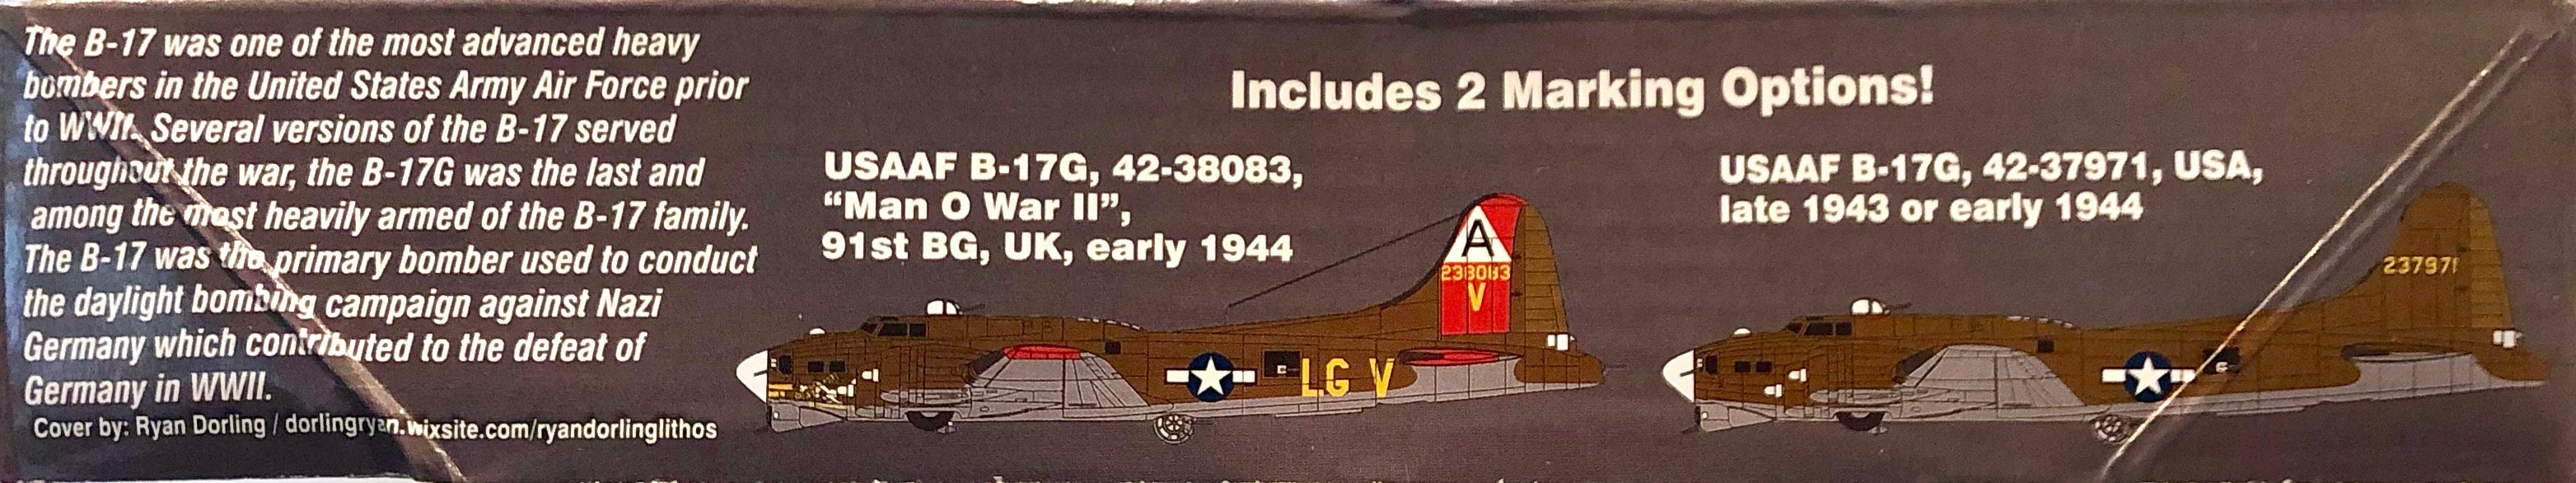 Minicraft 14754 Boeing B-17G Flying Fortress